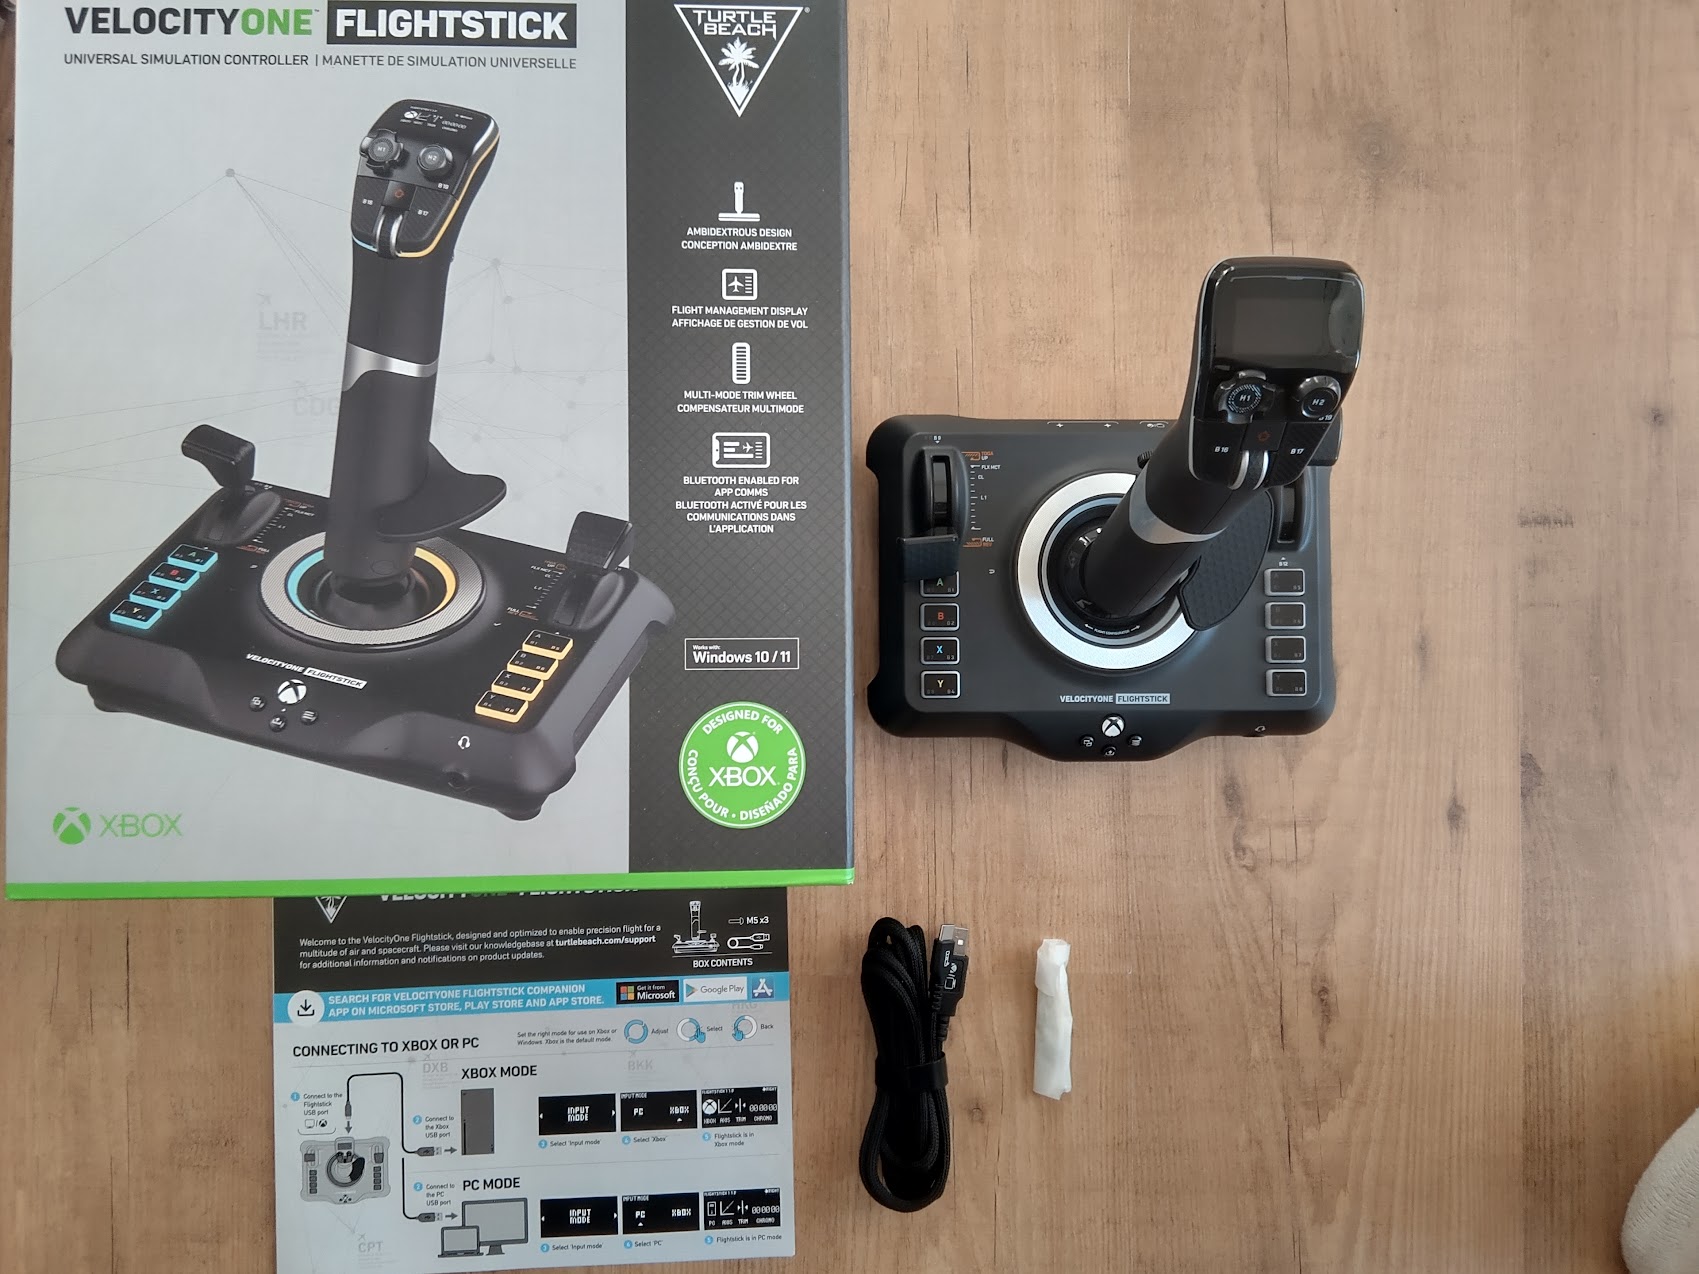 Turtle Beach VelocityOne Flightstick Review (Hardware) - Official GBAtemp  Review | GBAtemp.net - The Independent Video Game Community